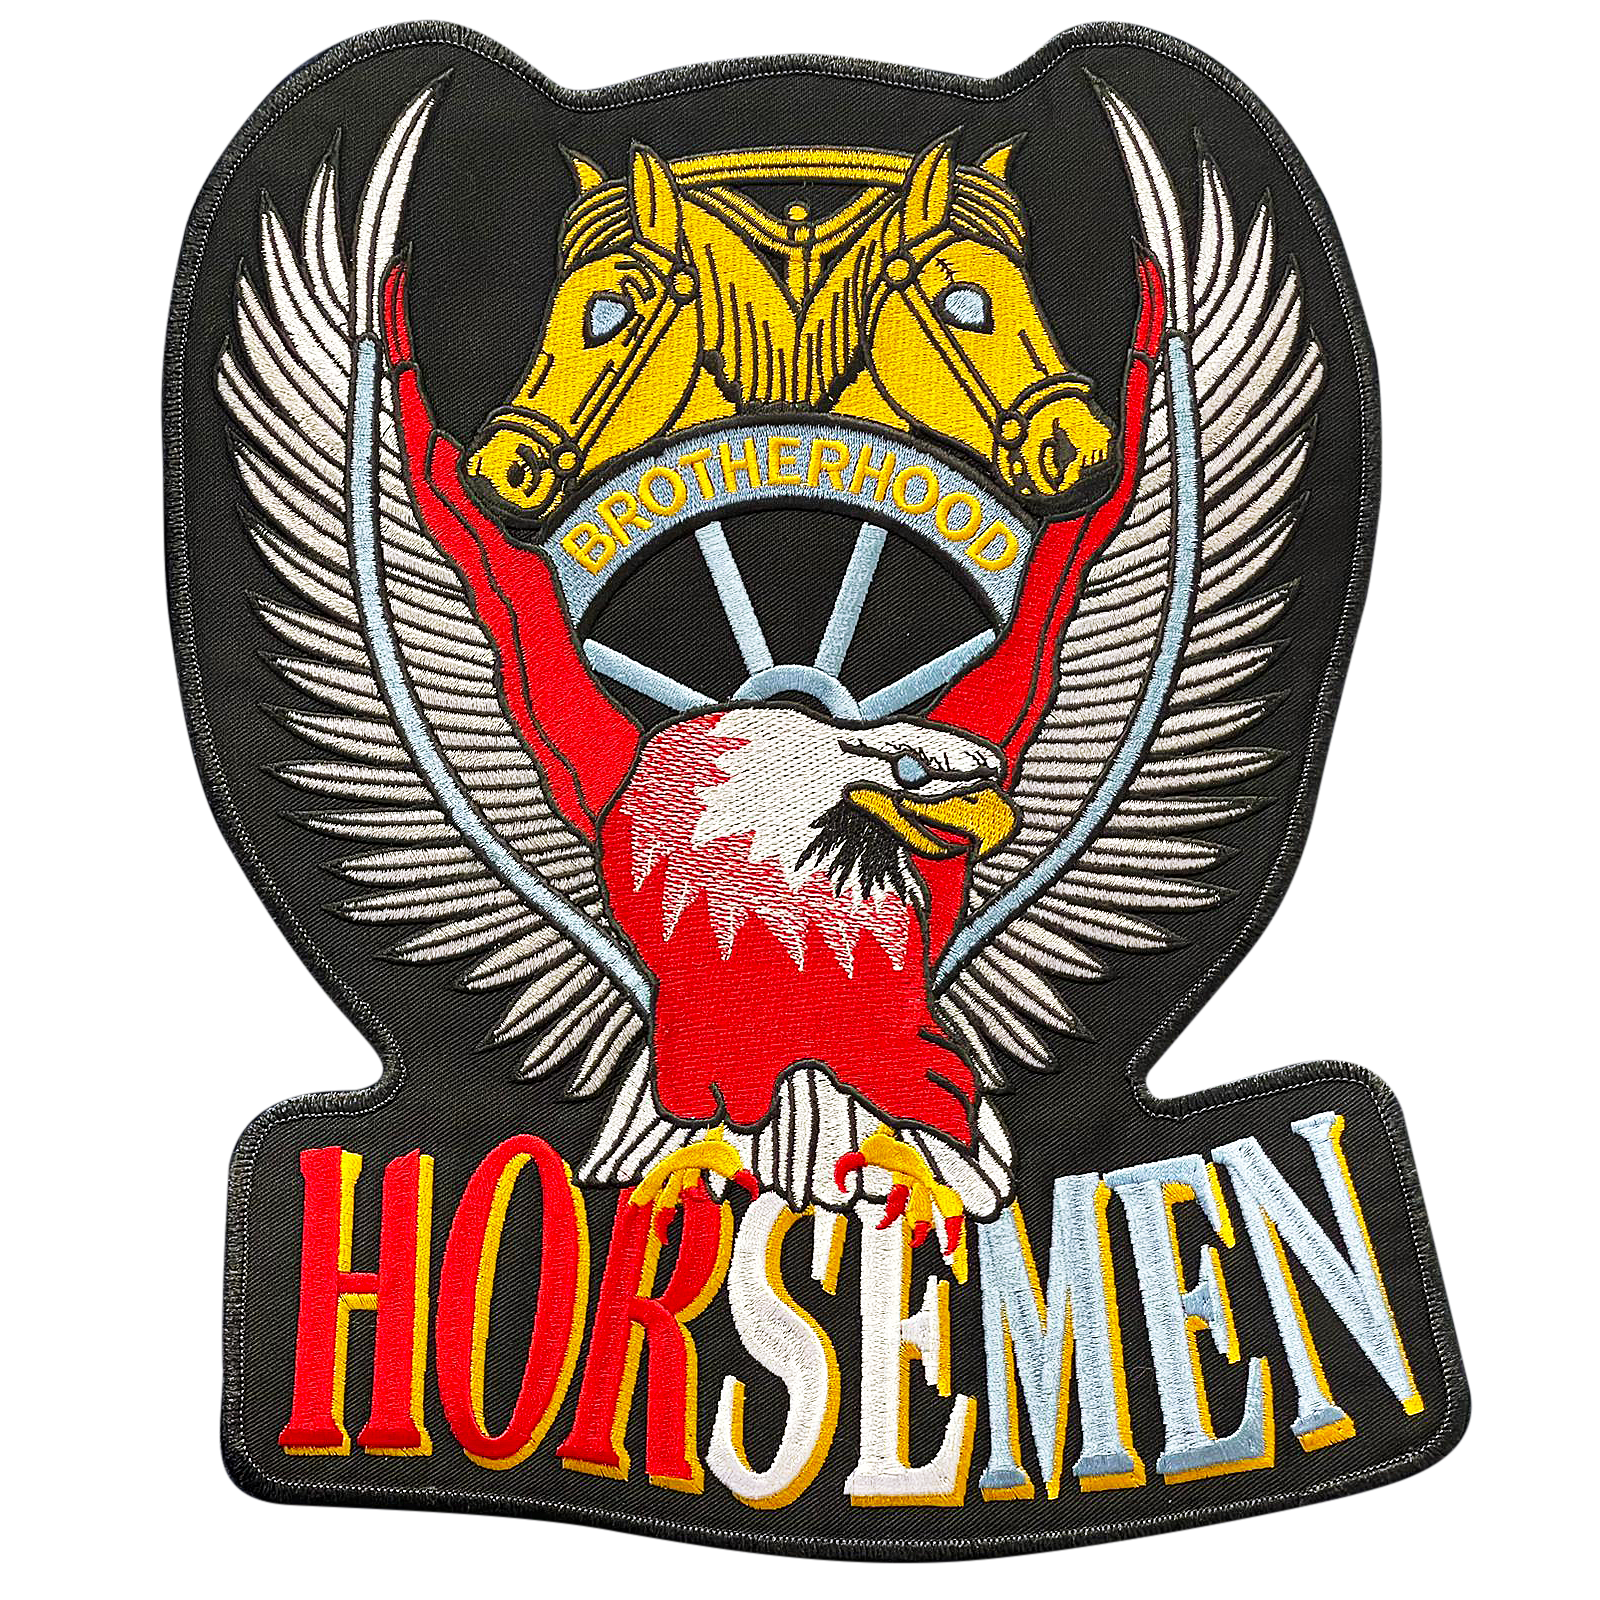 A horsemen patch with an eagle and horses on it